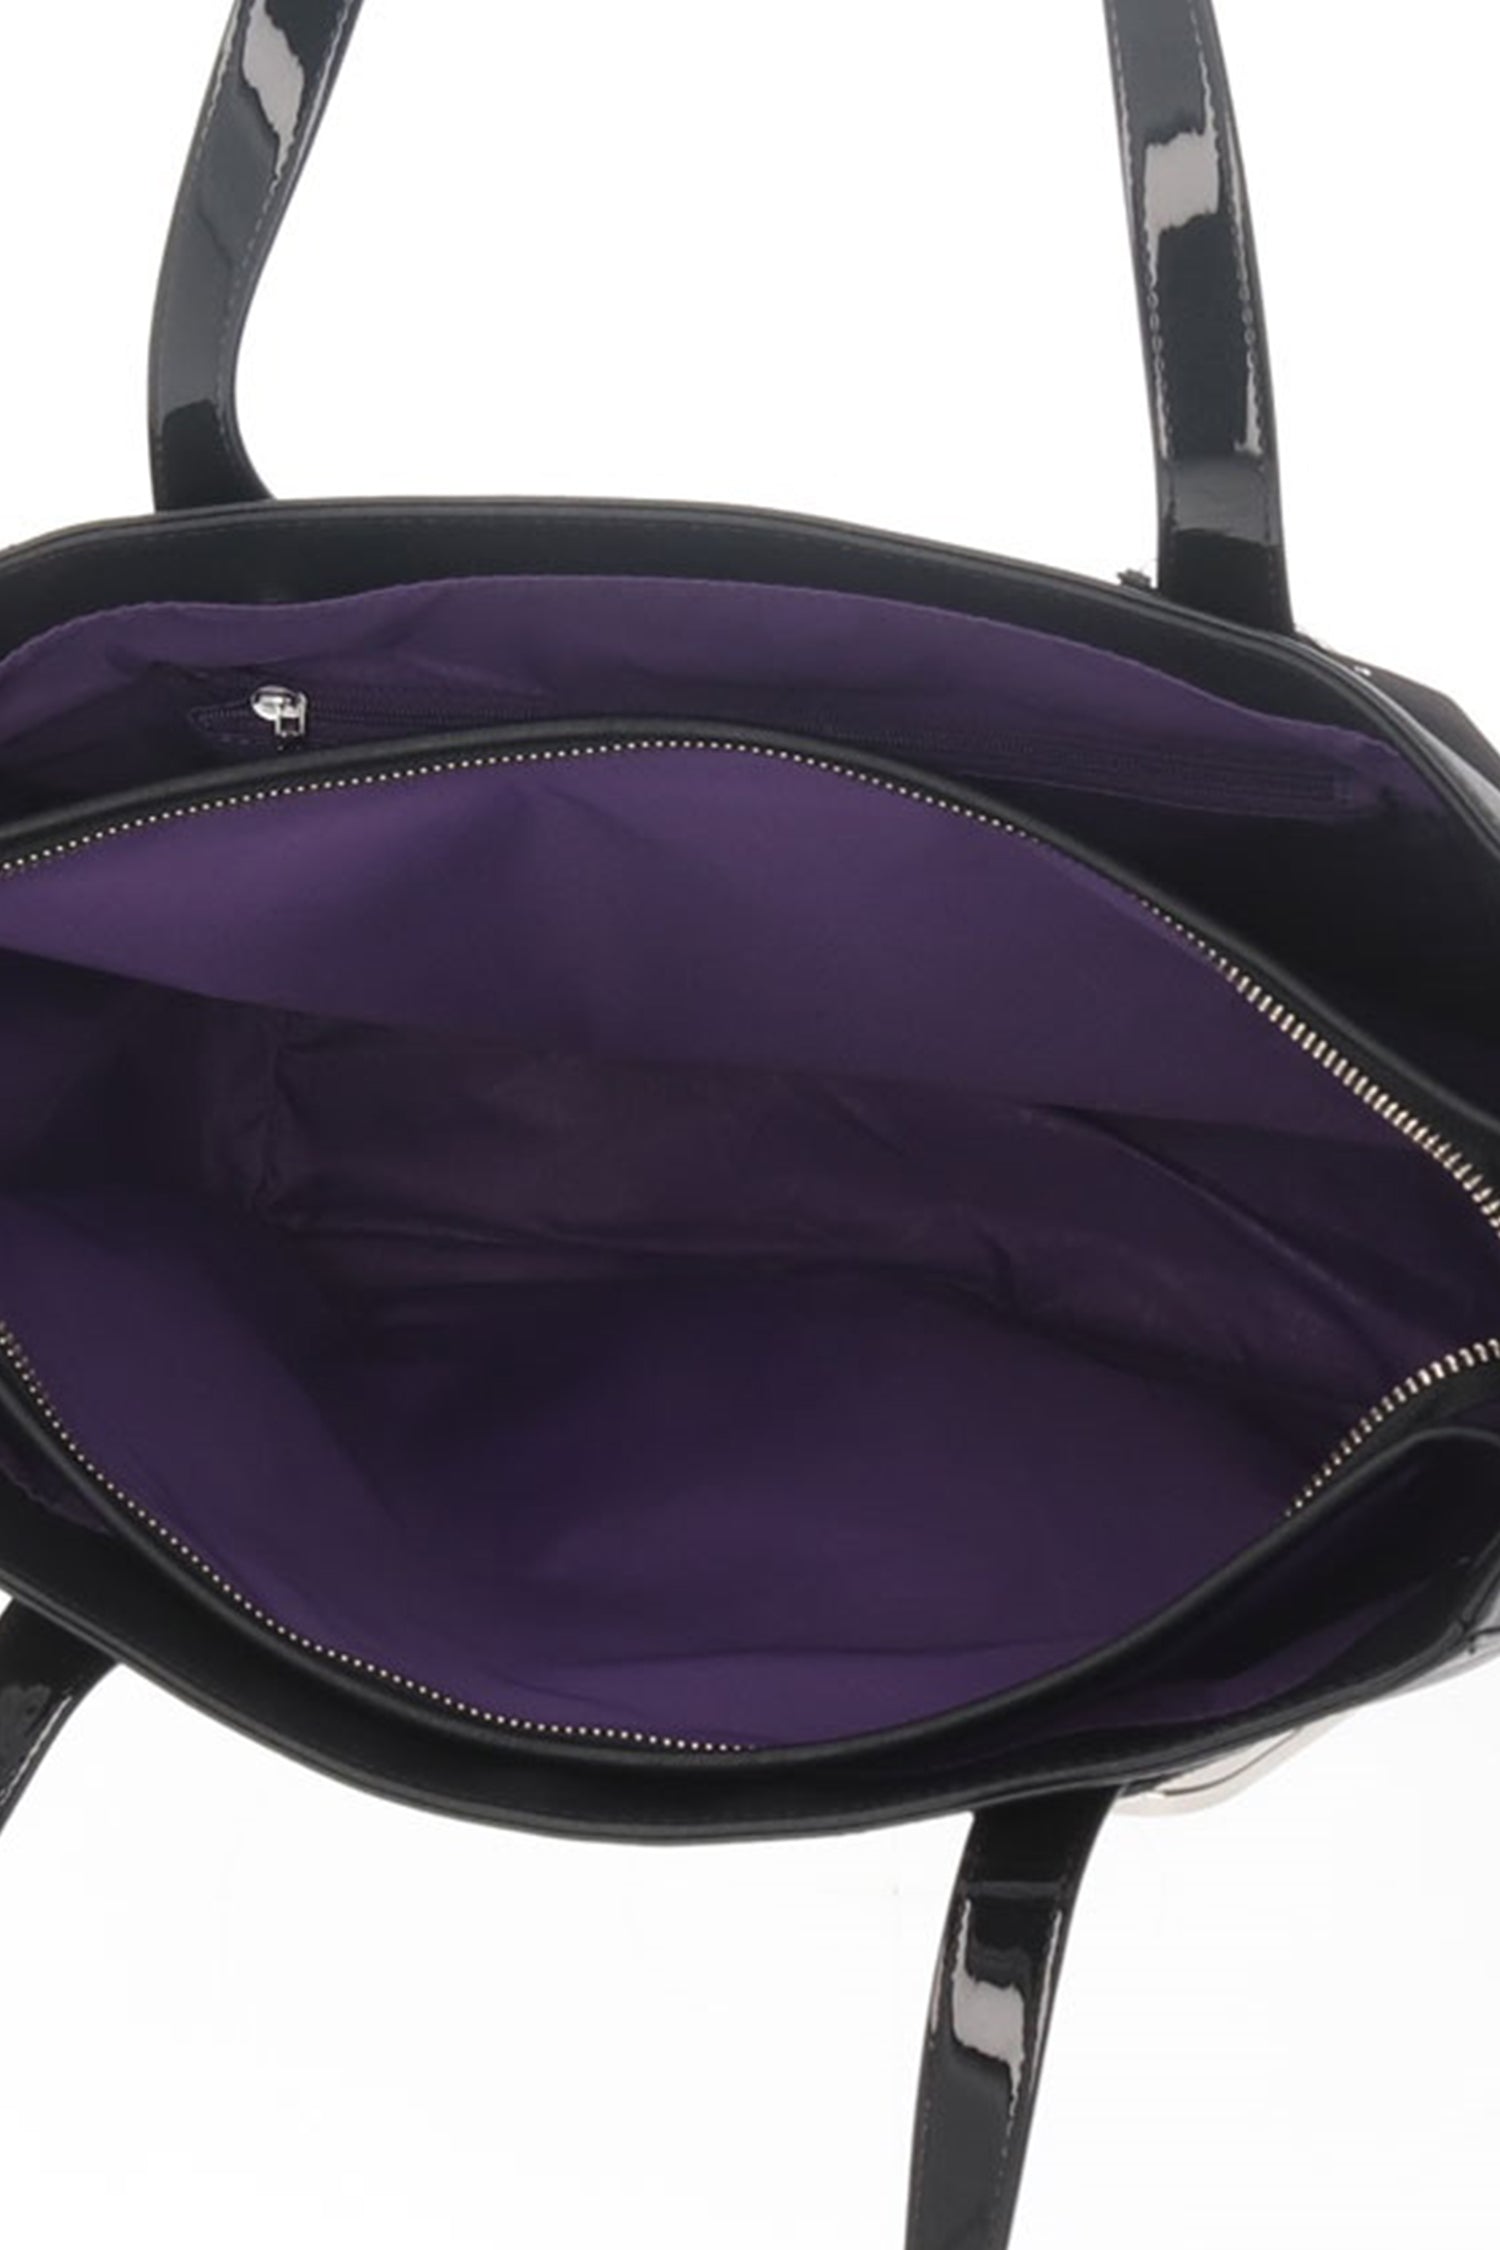 The Metallica Large Tote Bag Black open is purple inside plenty of space to carry your belonging